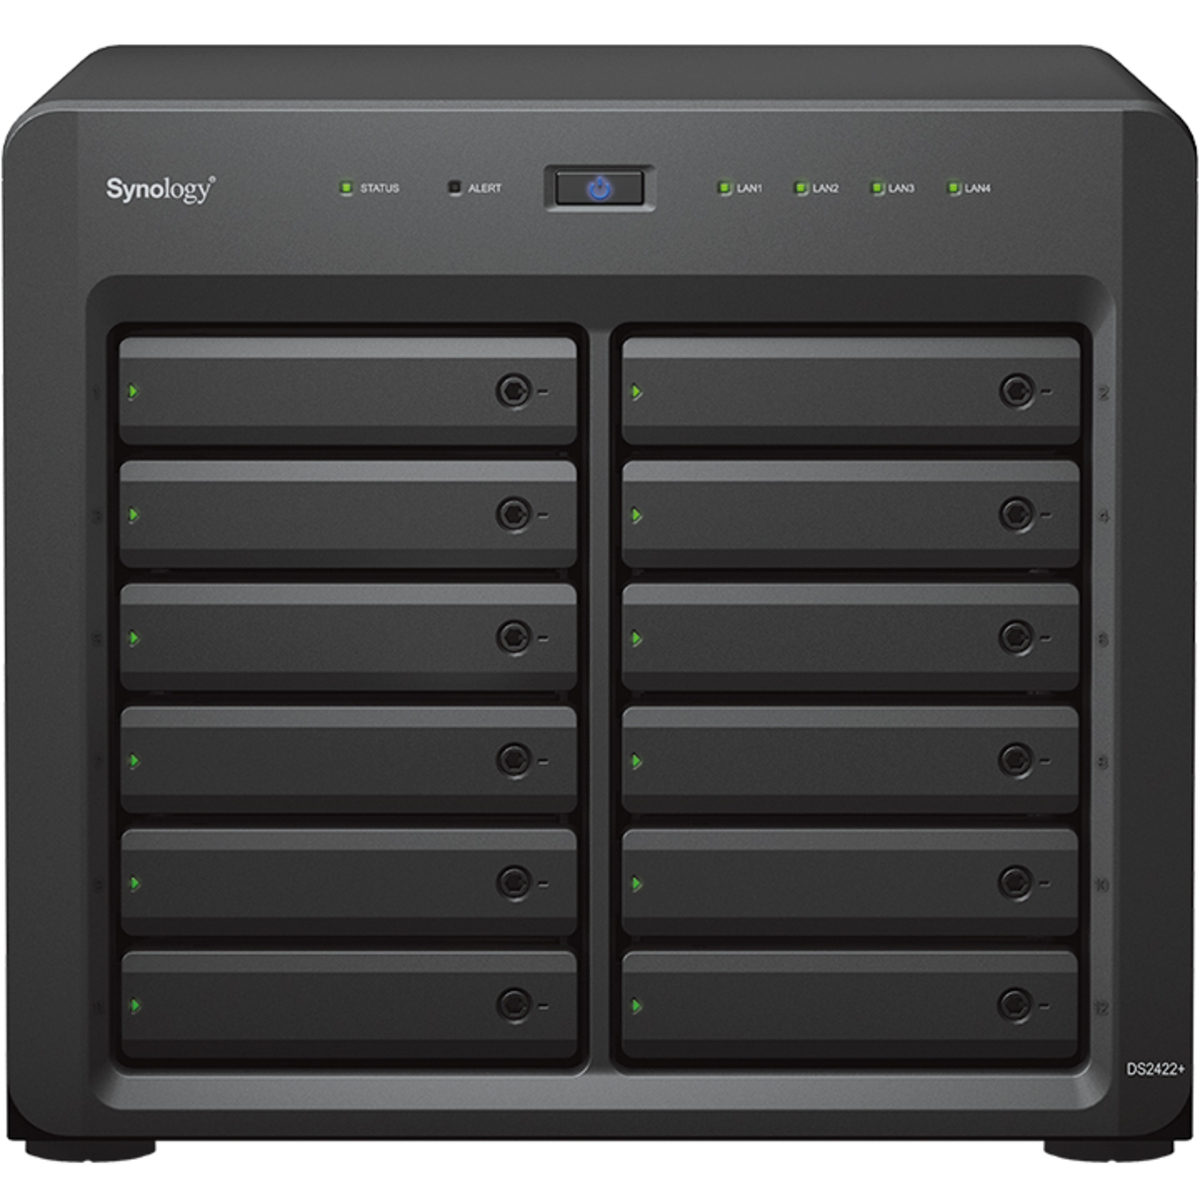 Synology DiskStation DS2422+ 5tb 12-Bay Desktop Multimedia / Power User / Business NAS - Network Attached Storage Device 10x500gb Crucial MX500 CT500MX500SSD1 2.5 560/510MB/s SATA 6Gb/s SSD CONSUMER Class Drives Installed - Burn-In Tested - FREE RAM UPGRADE DiskStation DS2422+